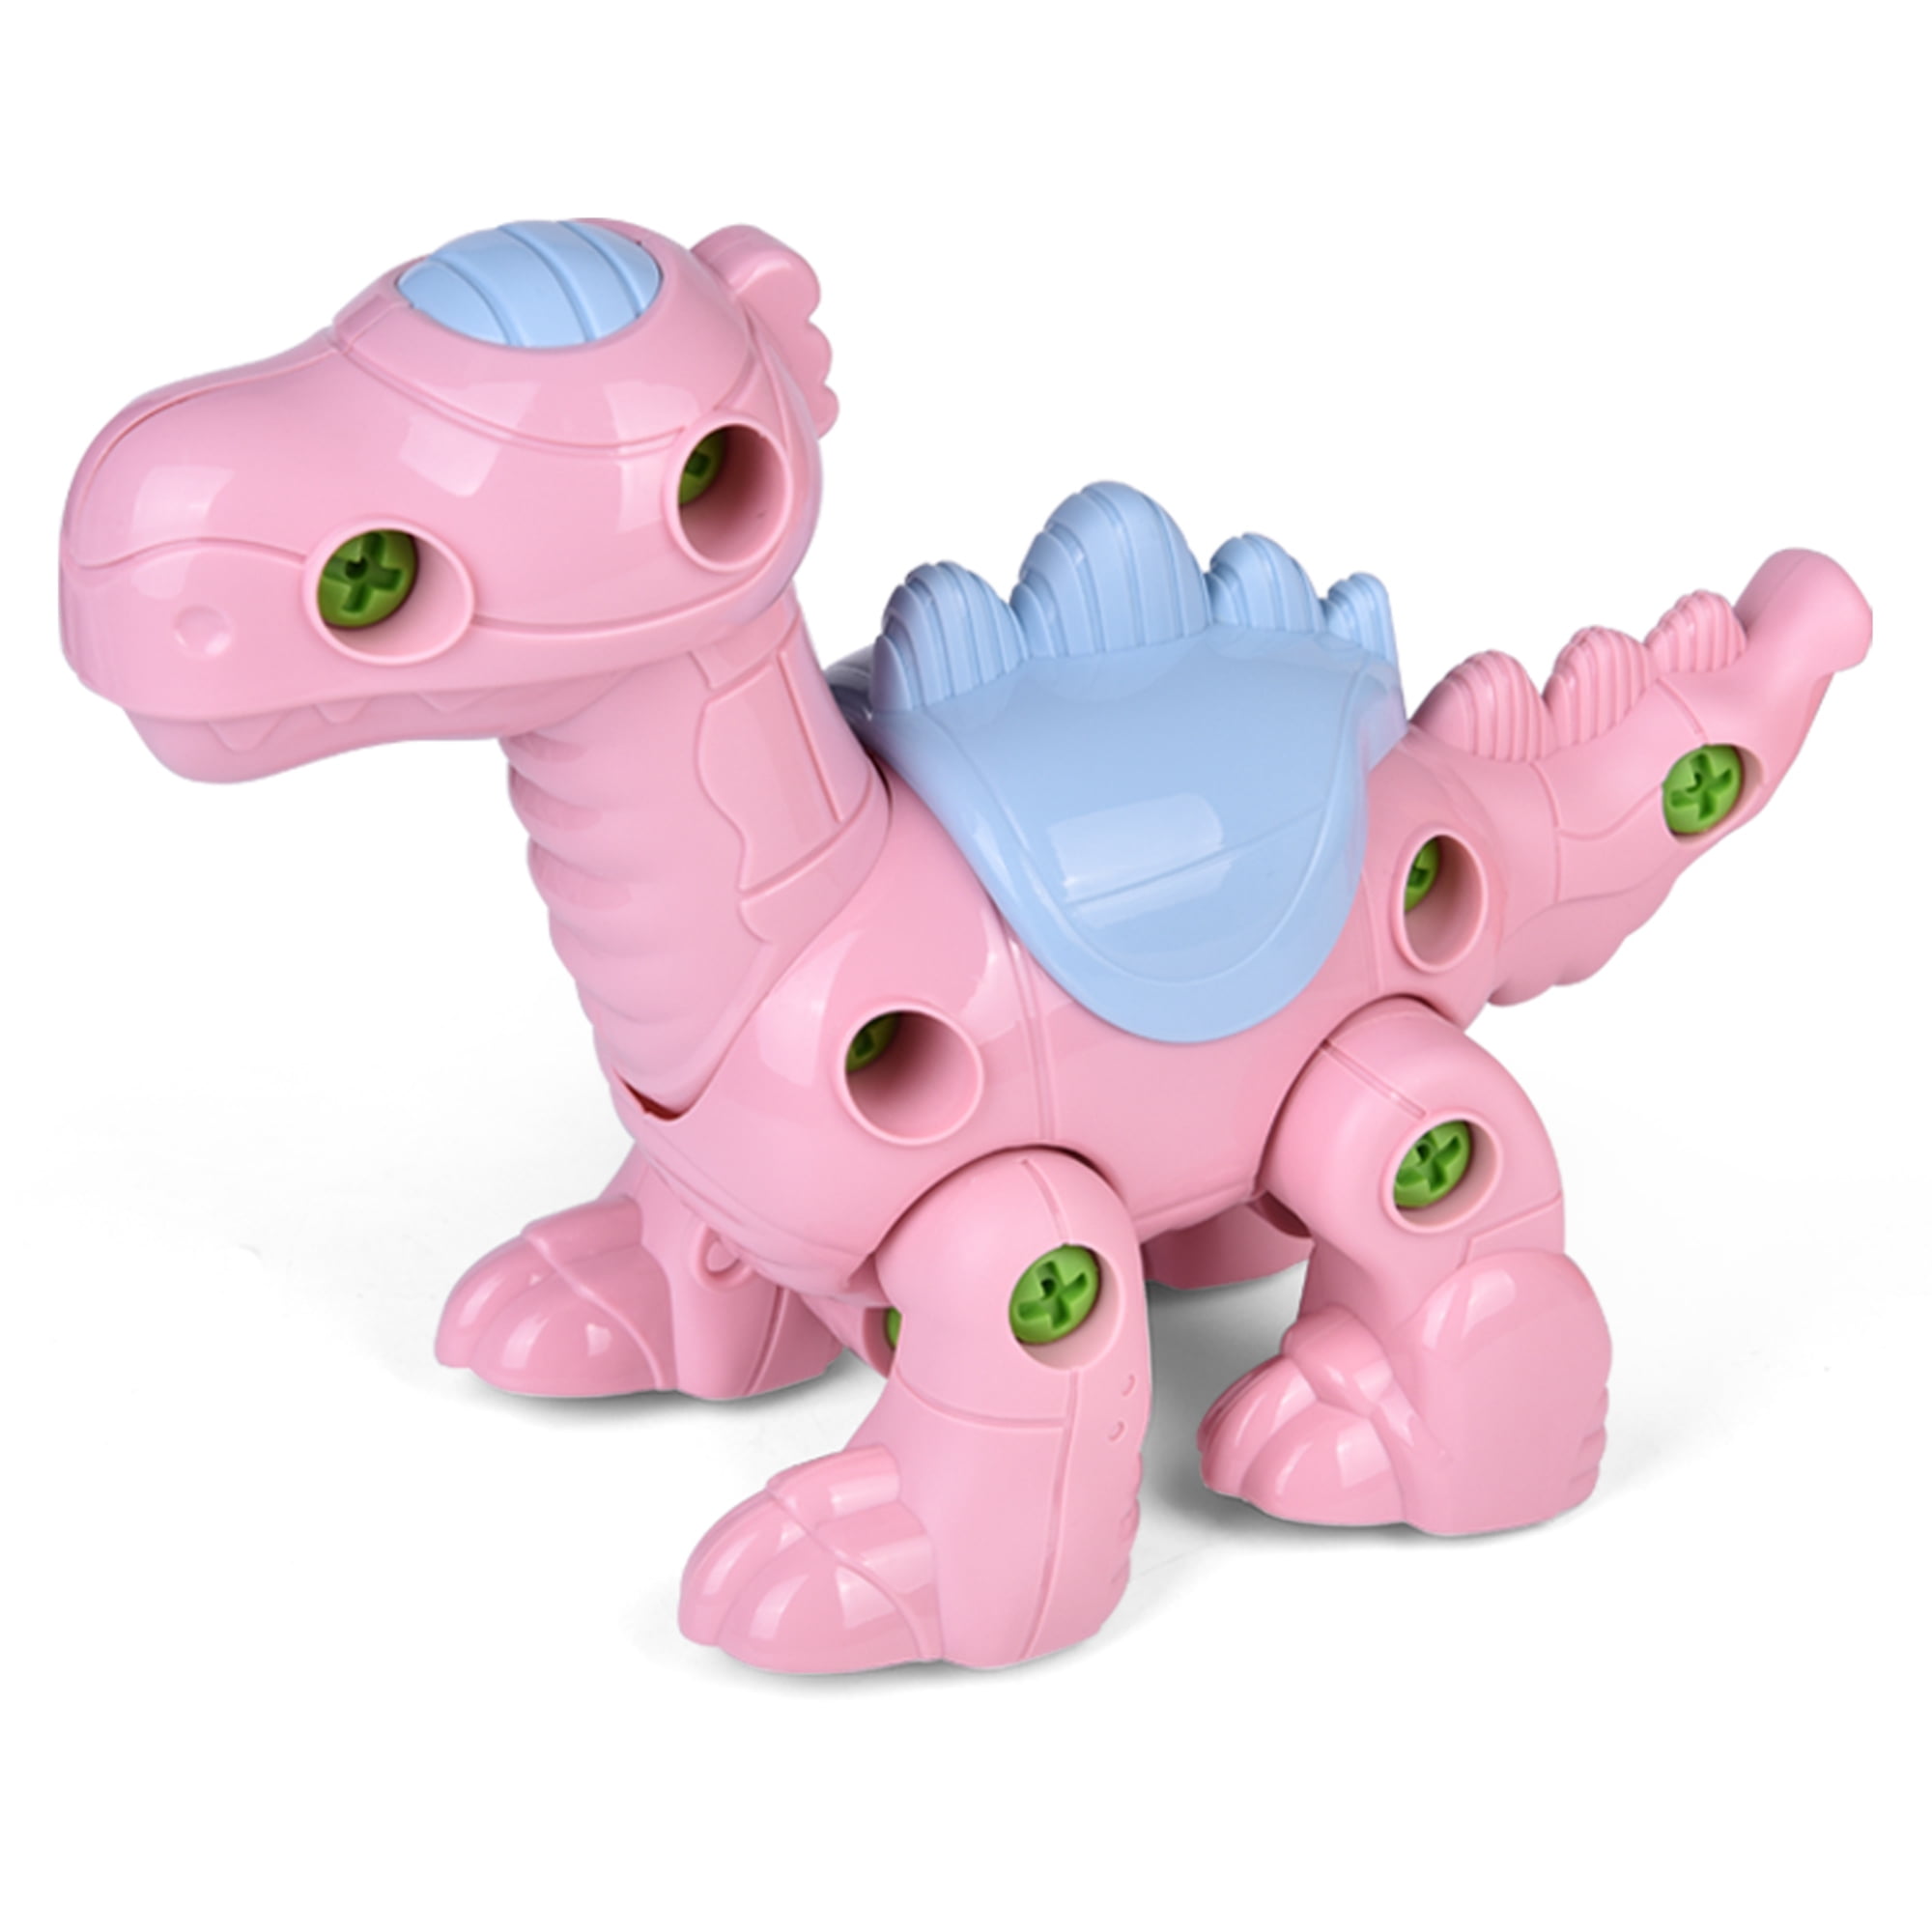 Take Apart Toys With Tools, 9 Inch Dinosaur Toys Building ...